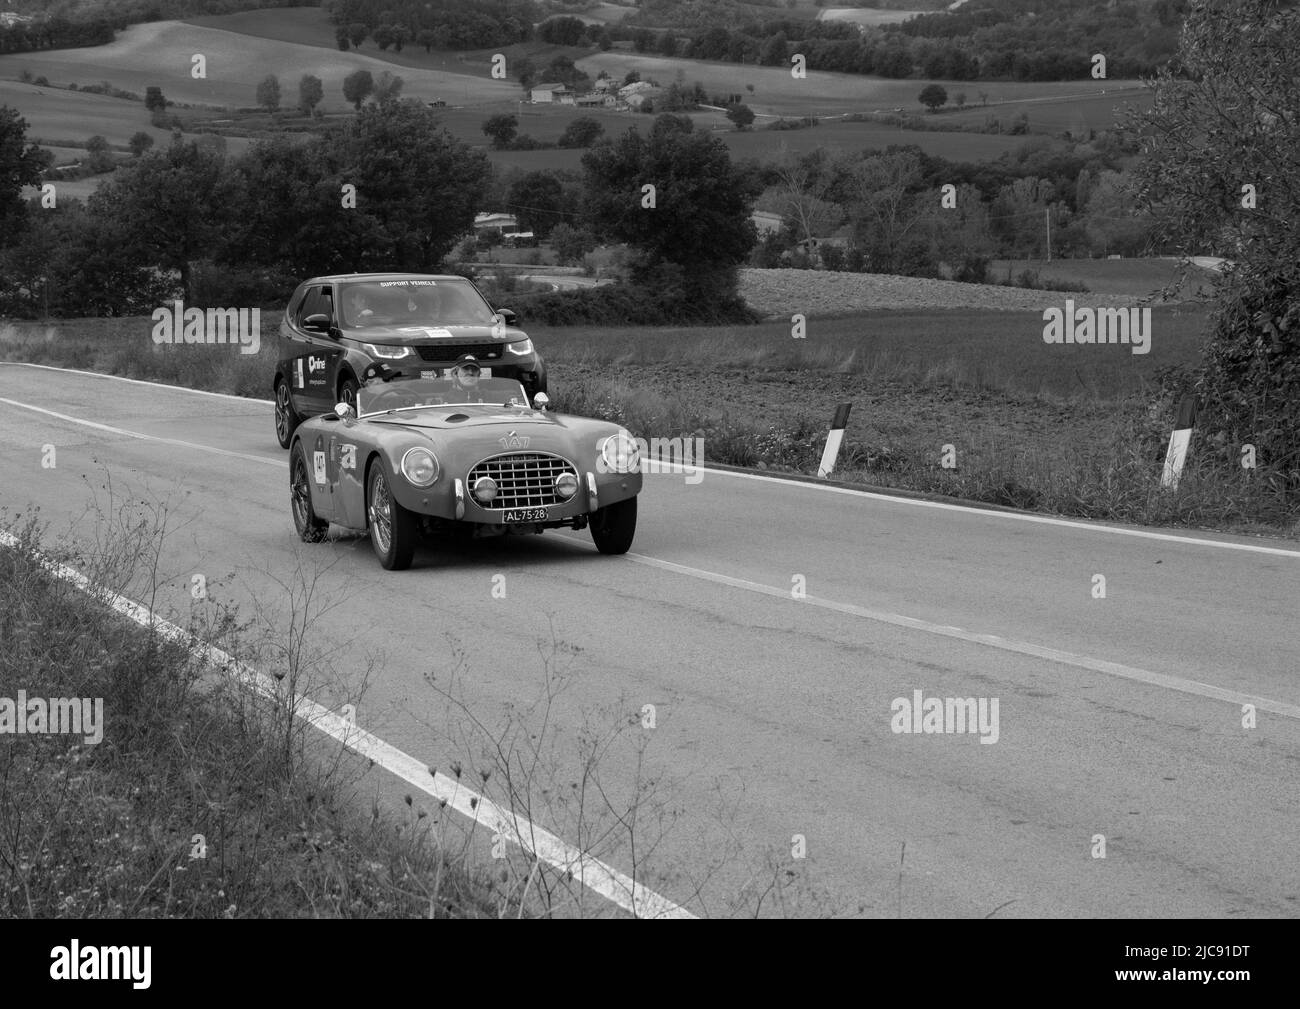 CAGLI , ITALY - OTT 24 - 2020 : TALBOT LAGO T26 GRAND SPORT 1949 1,65 1500 1949 on an old racing car in rally Mille Miglia 2020 the famous italian his Stock Photo